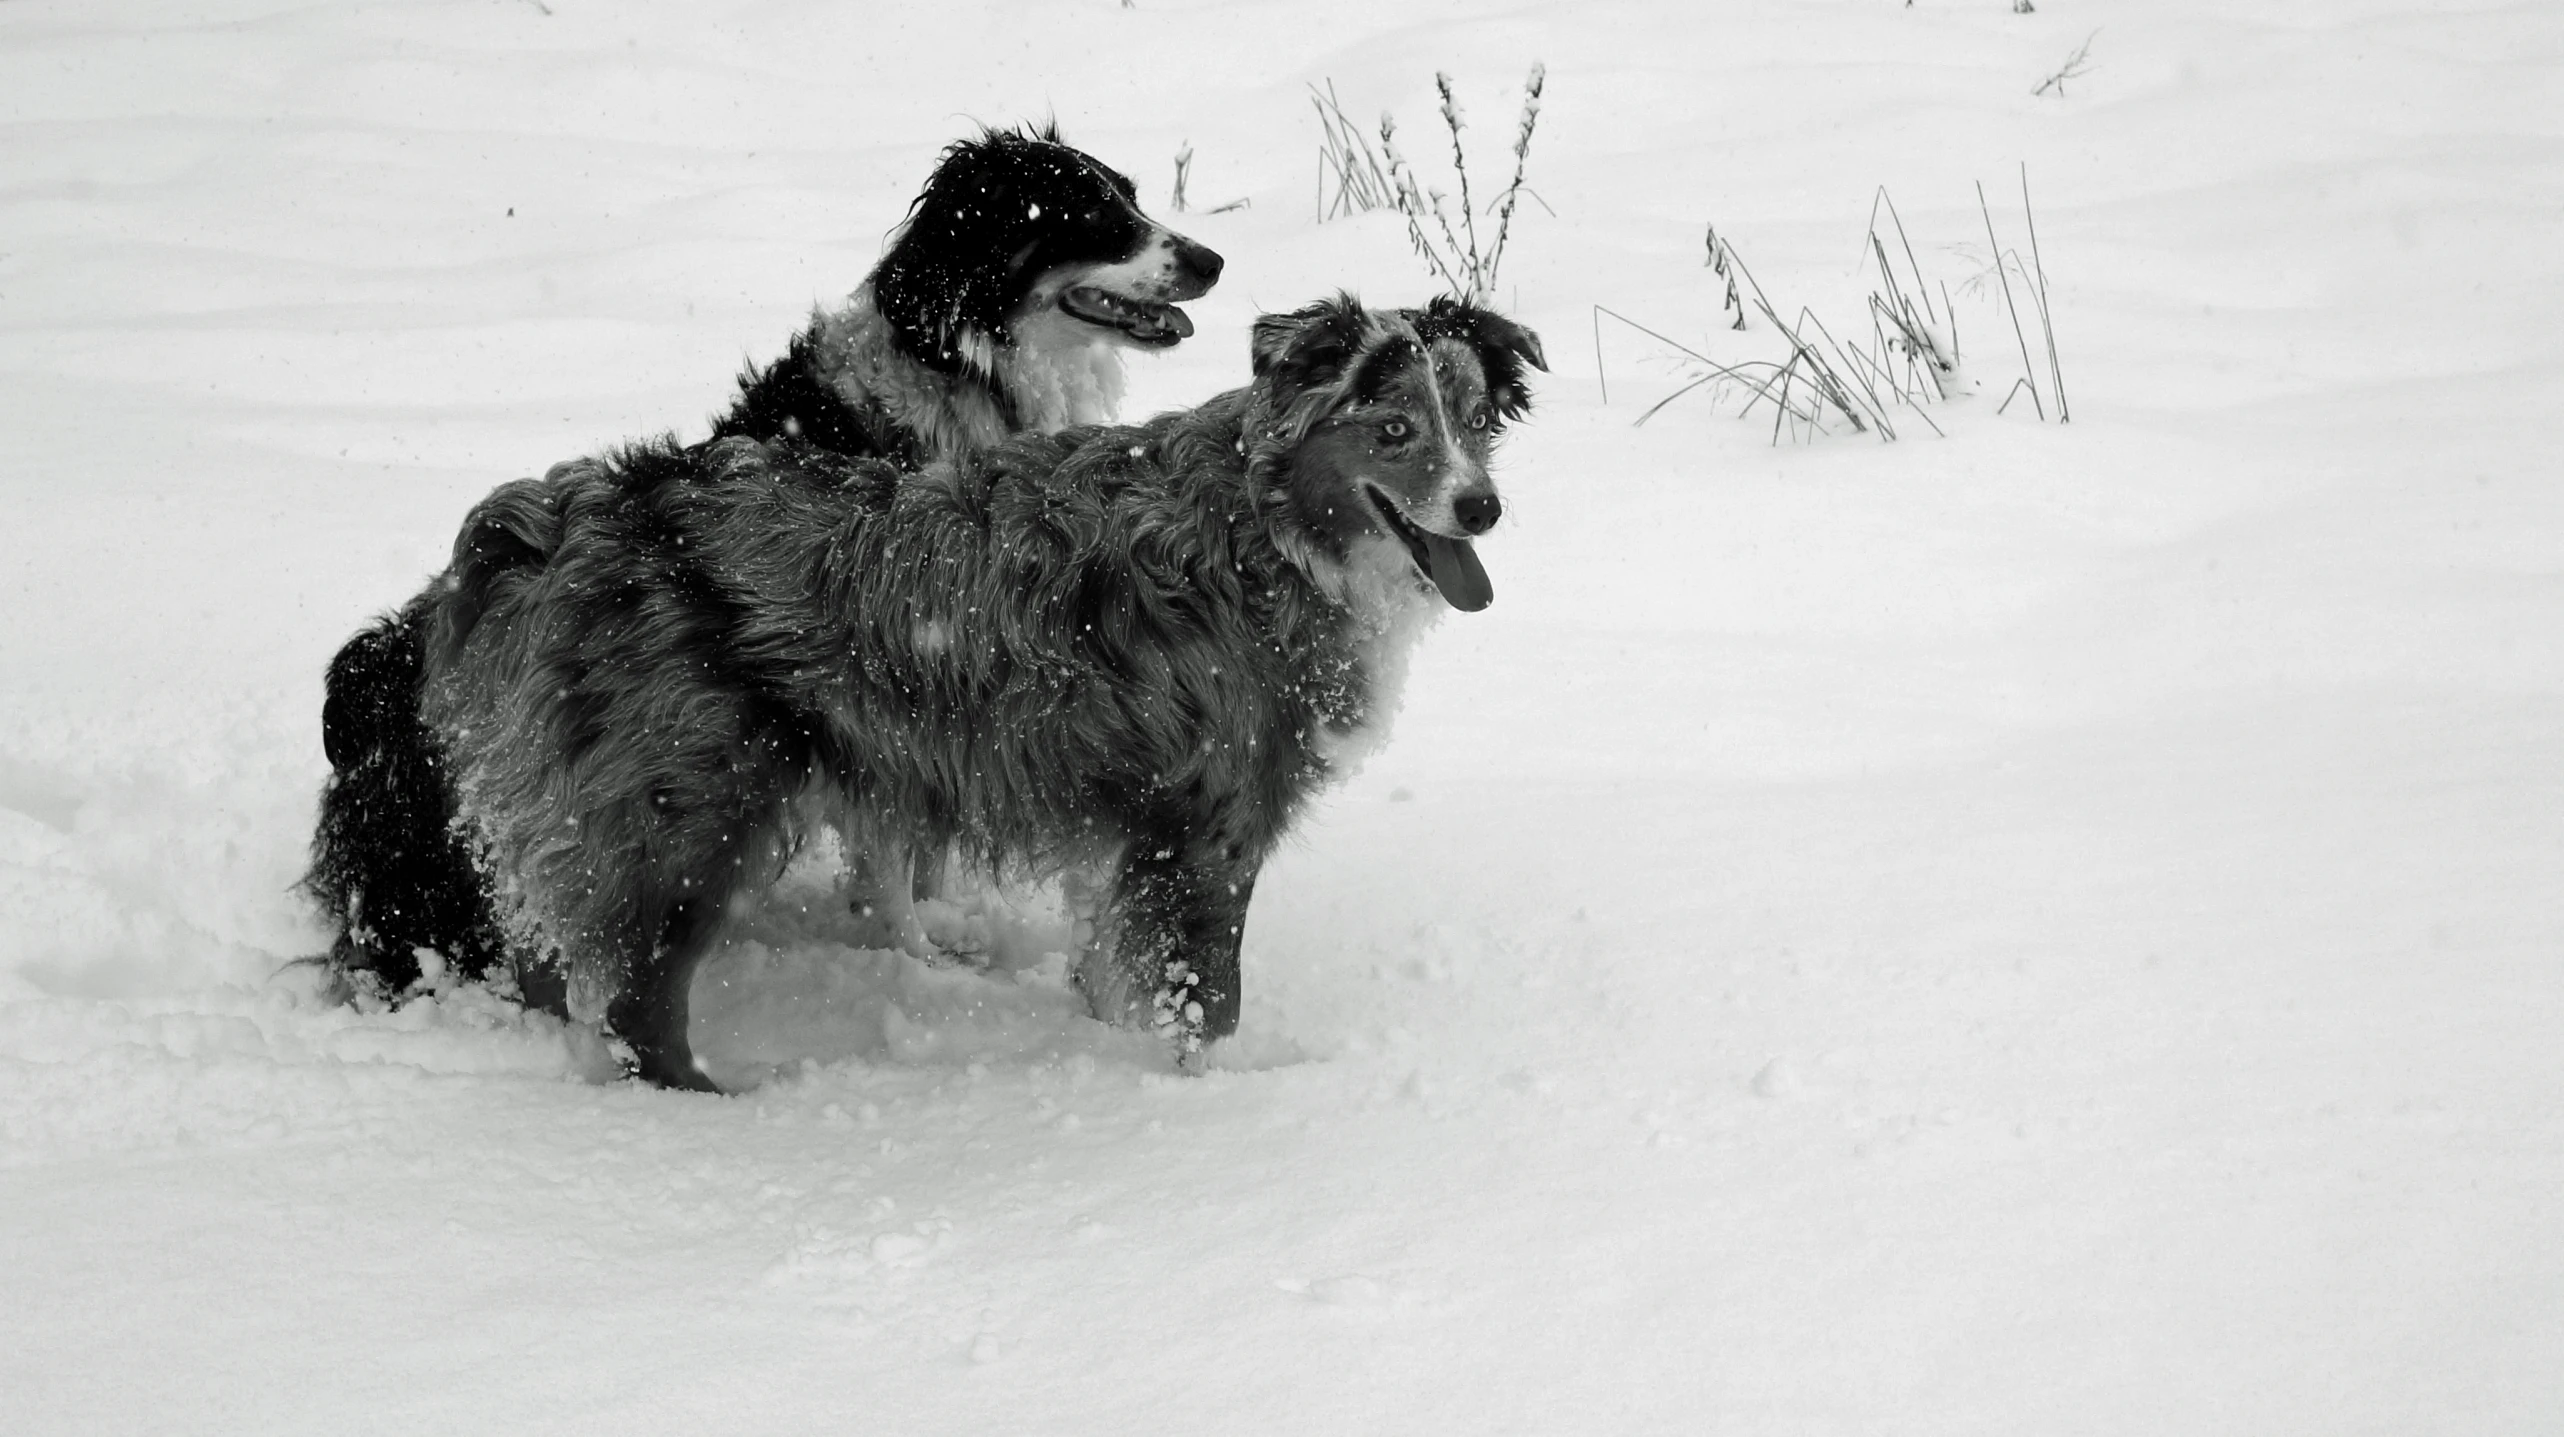 two dogs play in the snow in front of some bushes